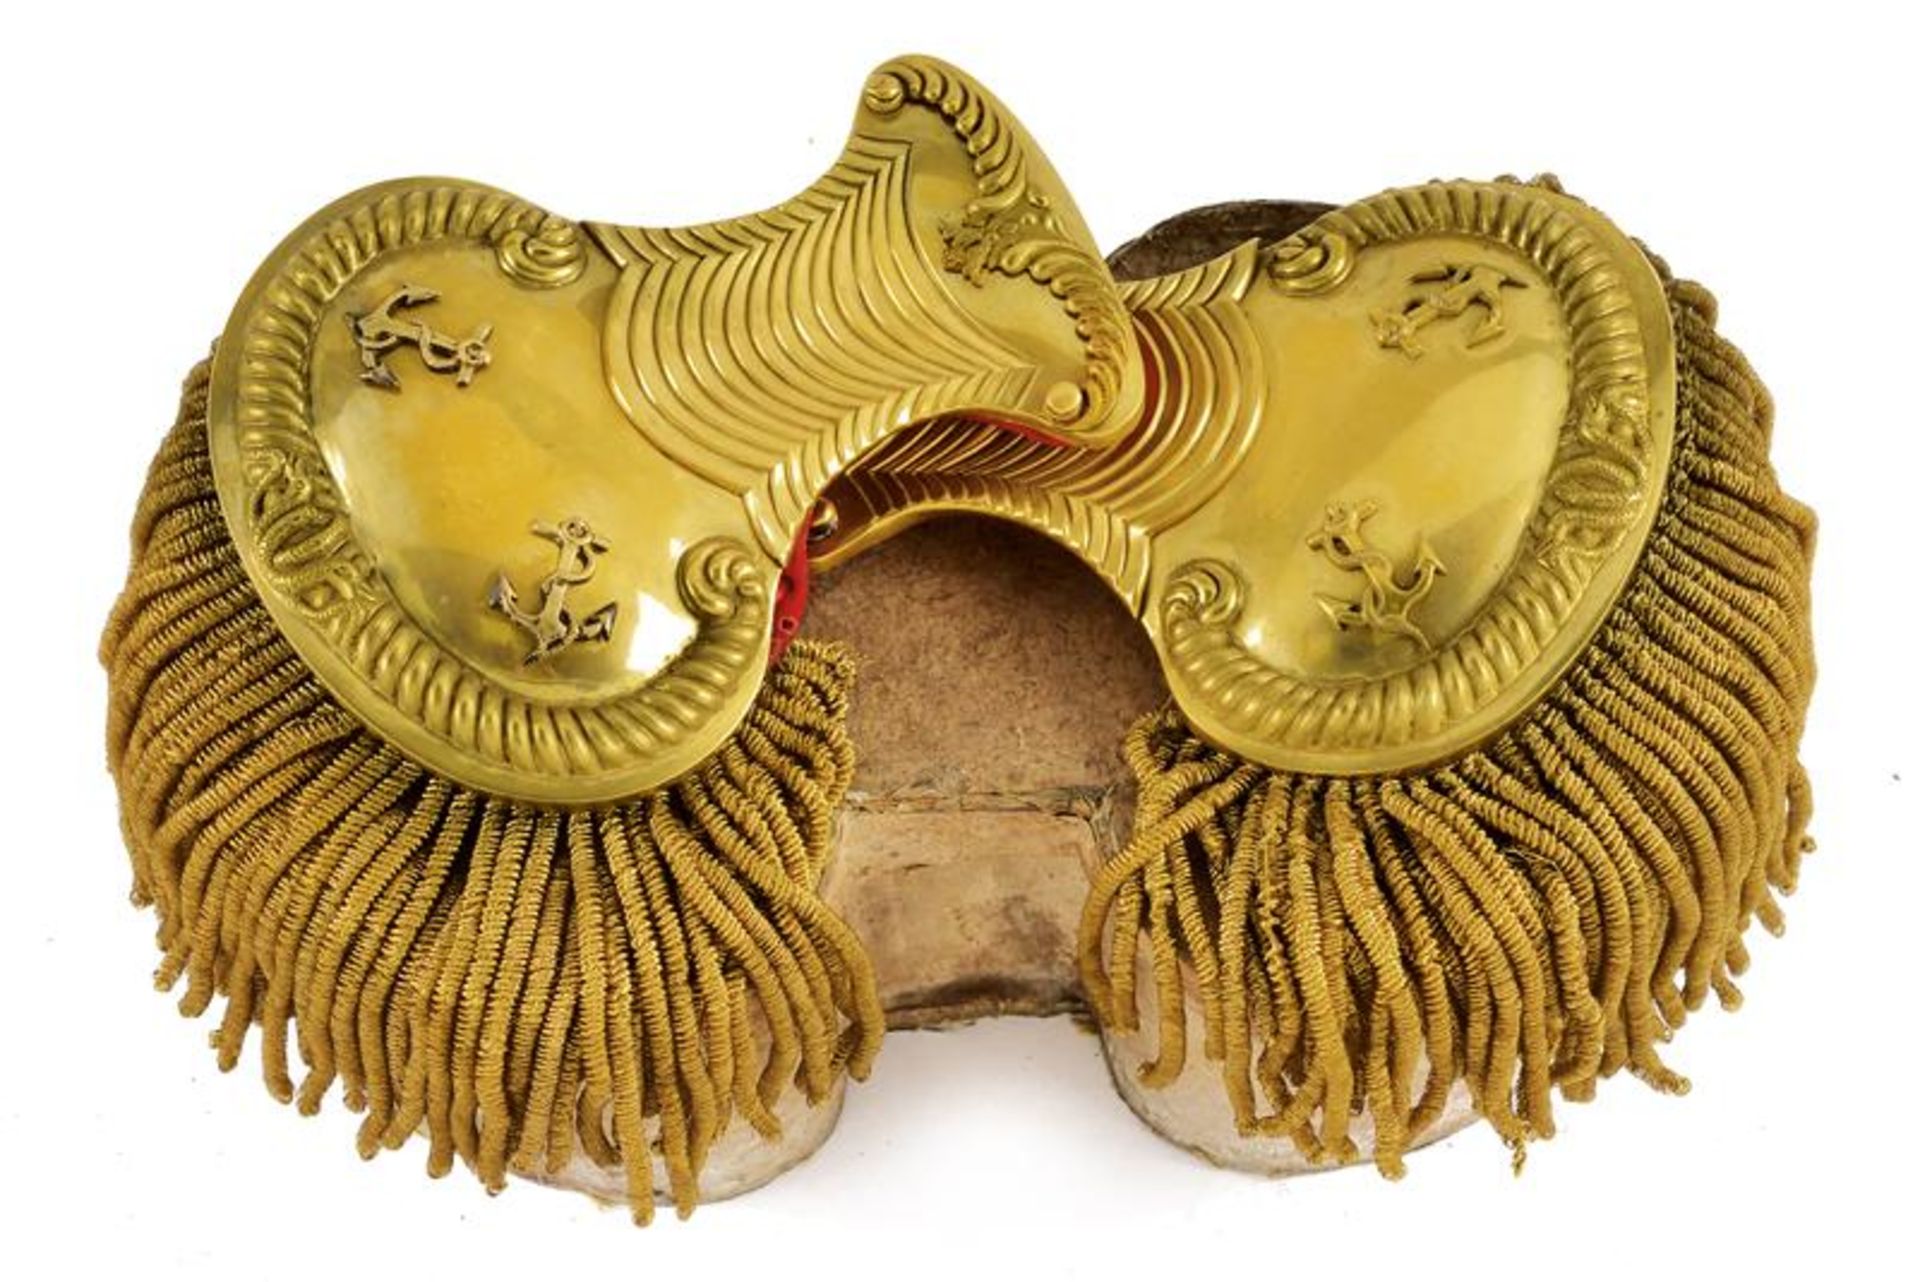 A pair of epaulettes of the Order of Saint Stephen